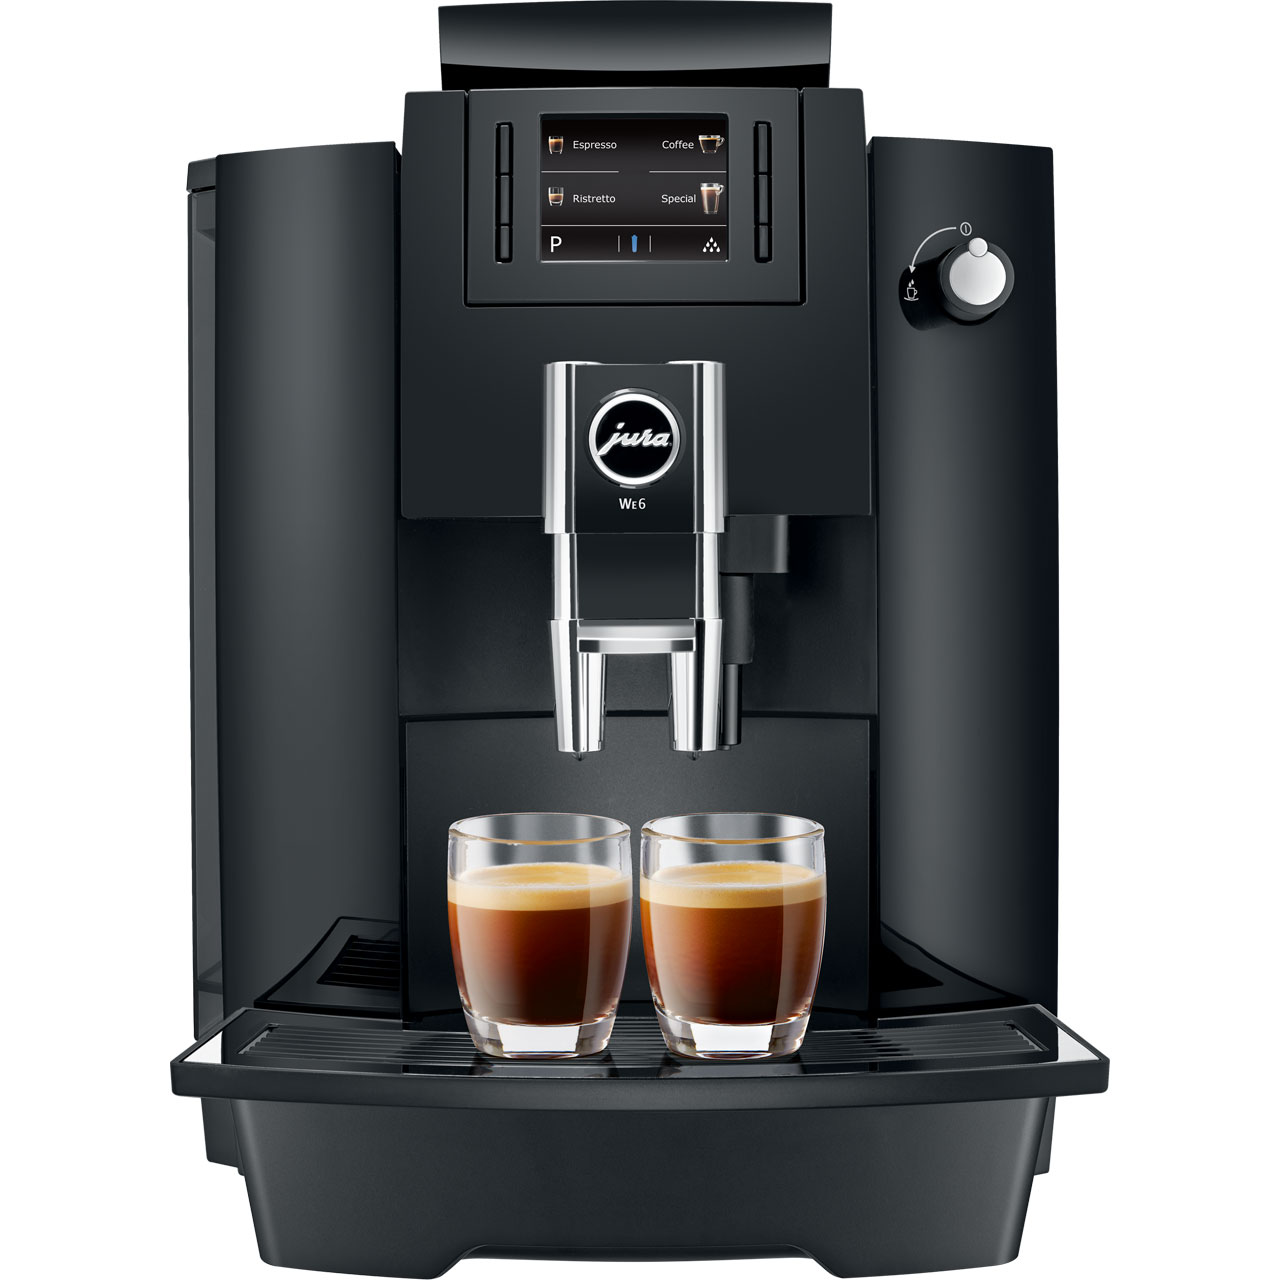 Jura WE6 15114 Commercial Bean to Cup Coffee Machine  Review